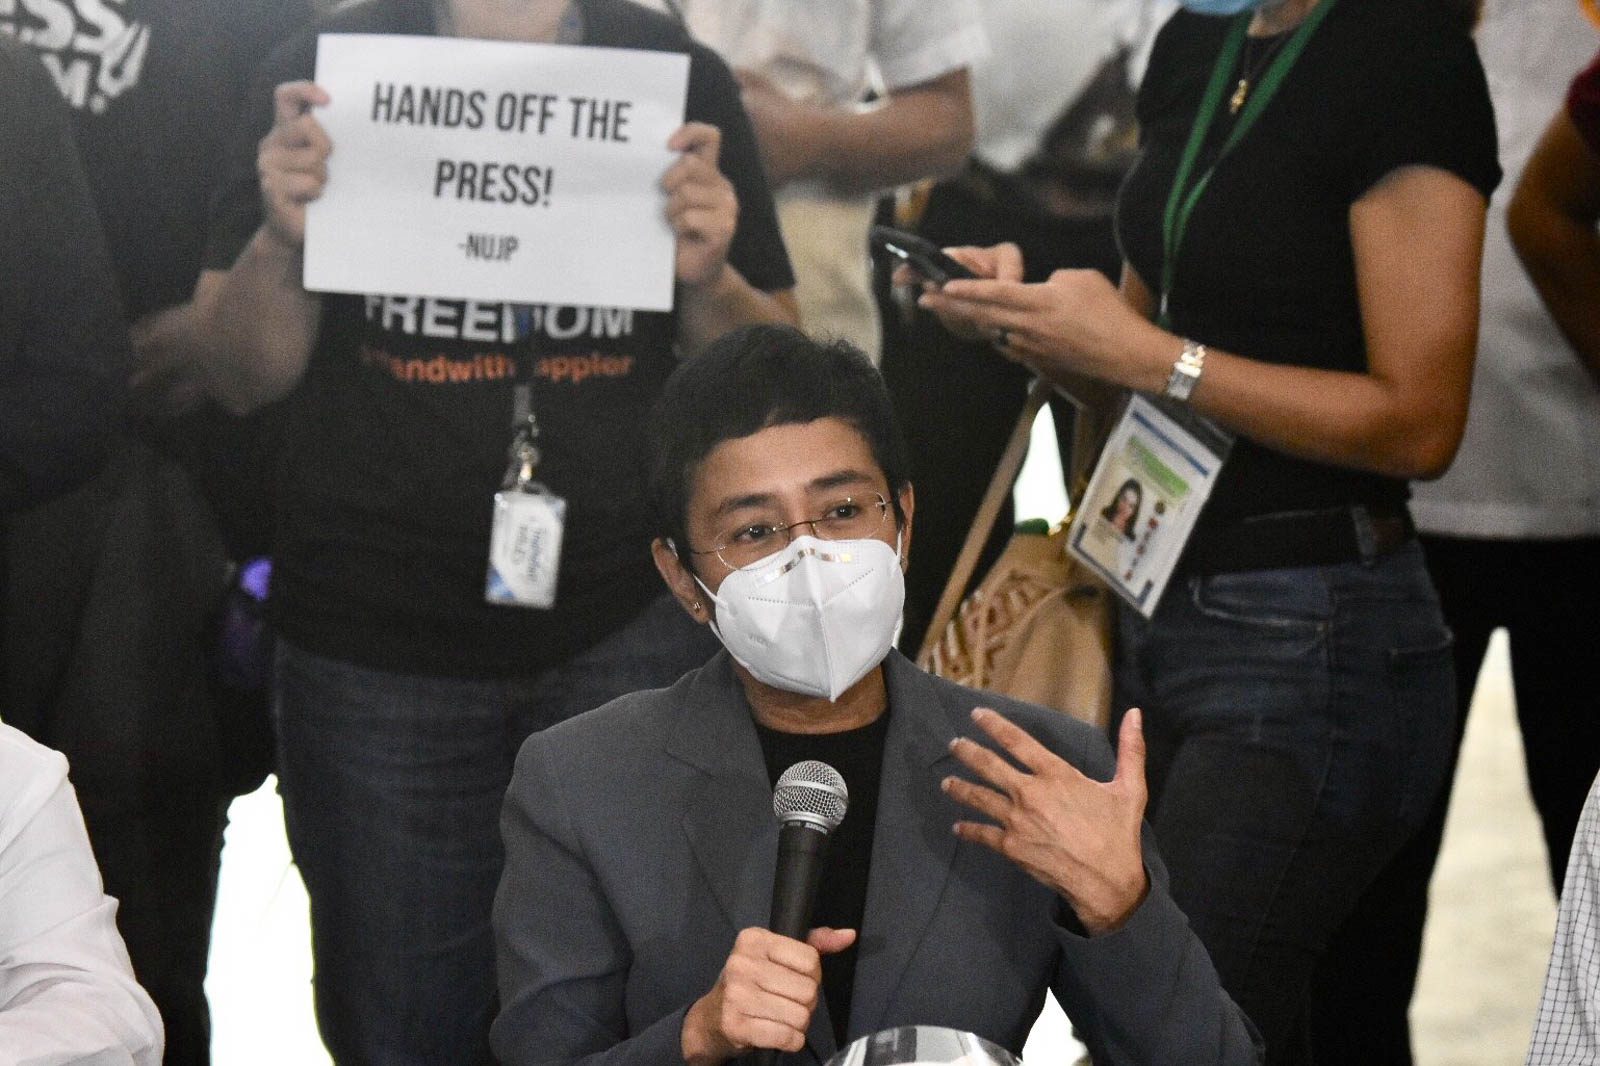 Media watchdog: Freedom of expression a ‘personal challenge’ to all Filipinos